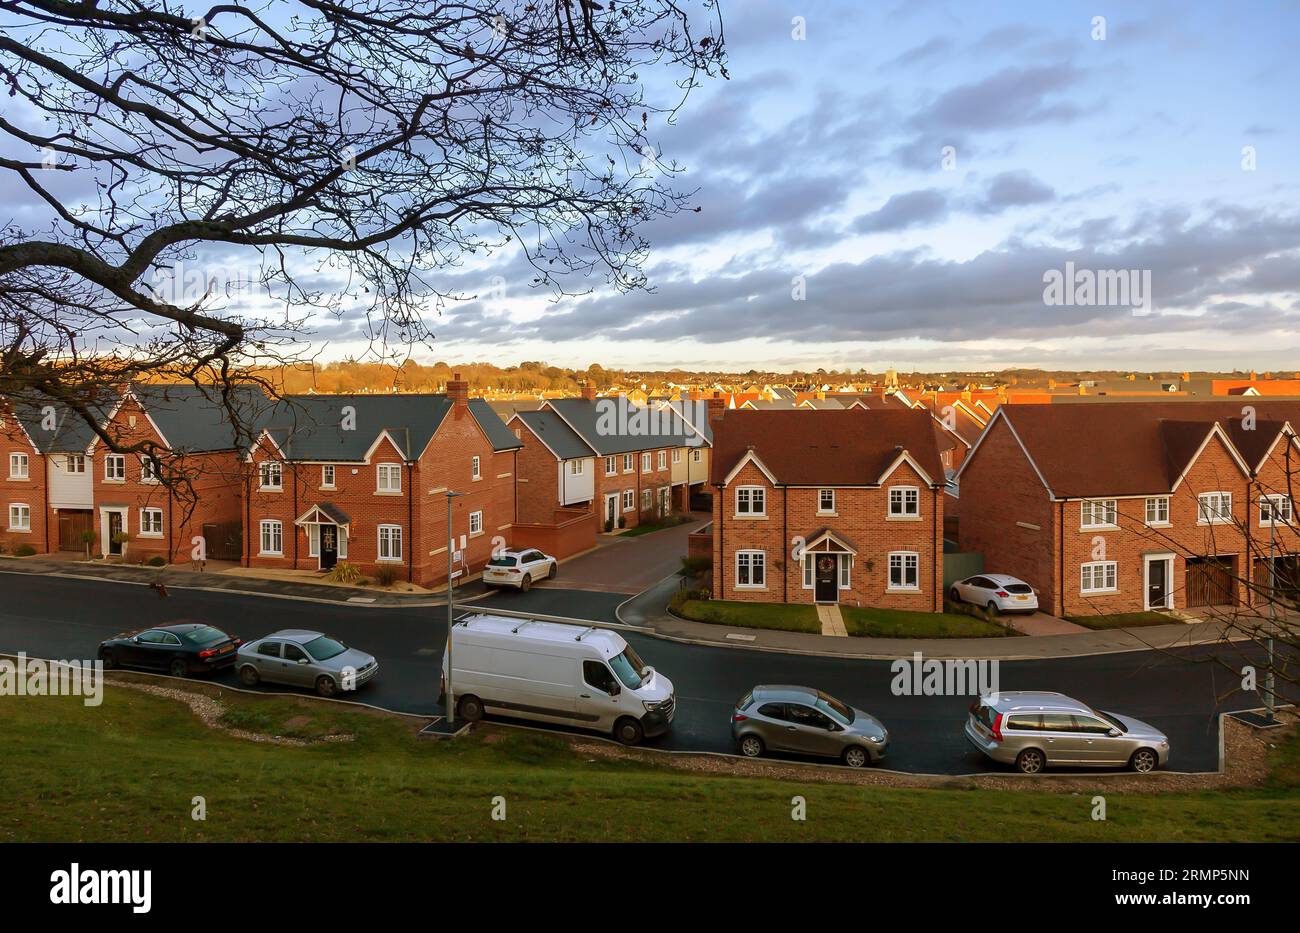 A new housing estate on a very early morning in December, viewed as the dawning sunrise spreads its light across the rooftops under scudding clouds. Stock Photo